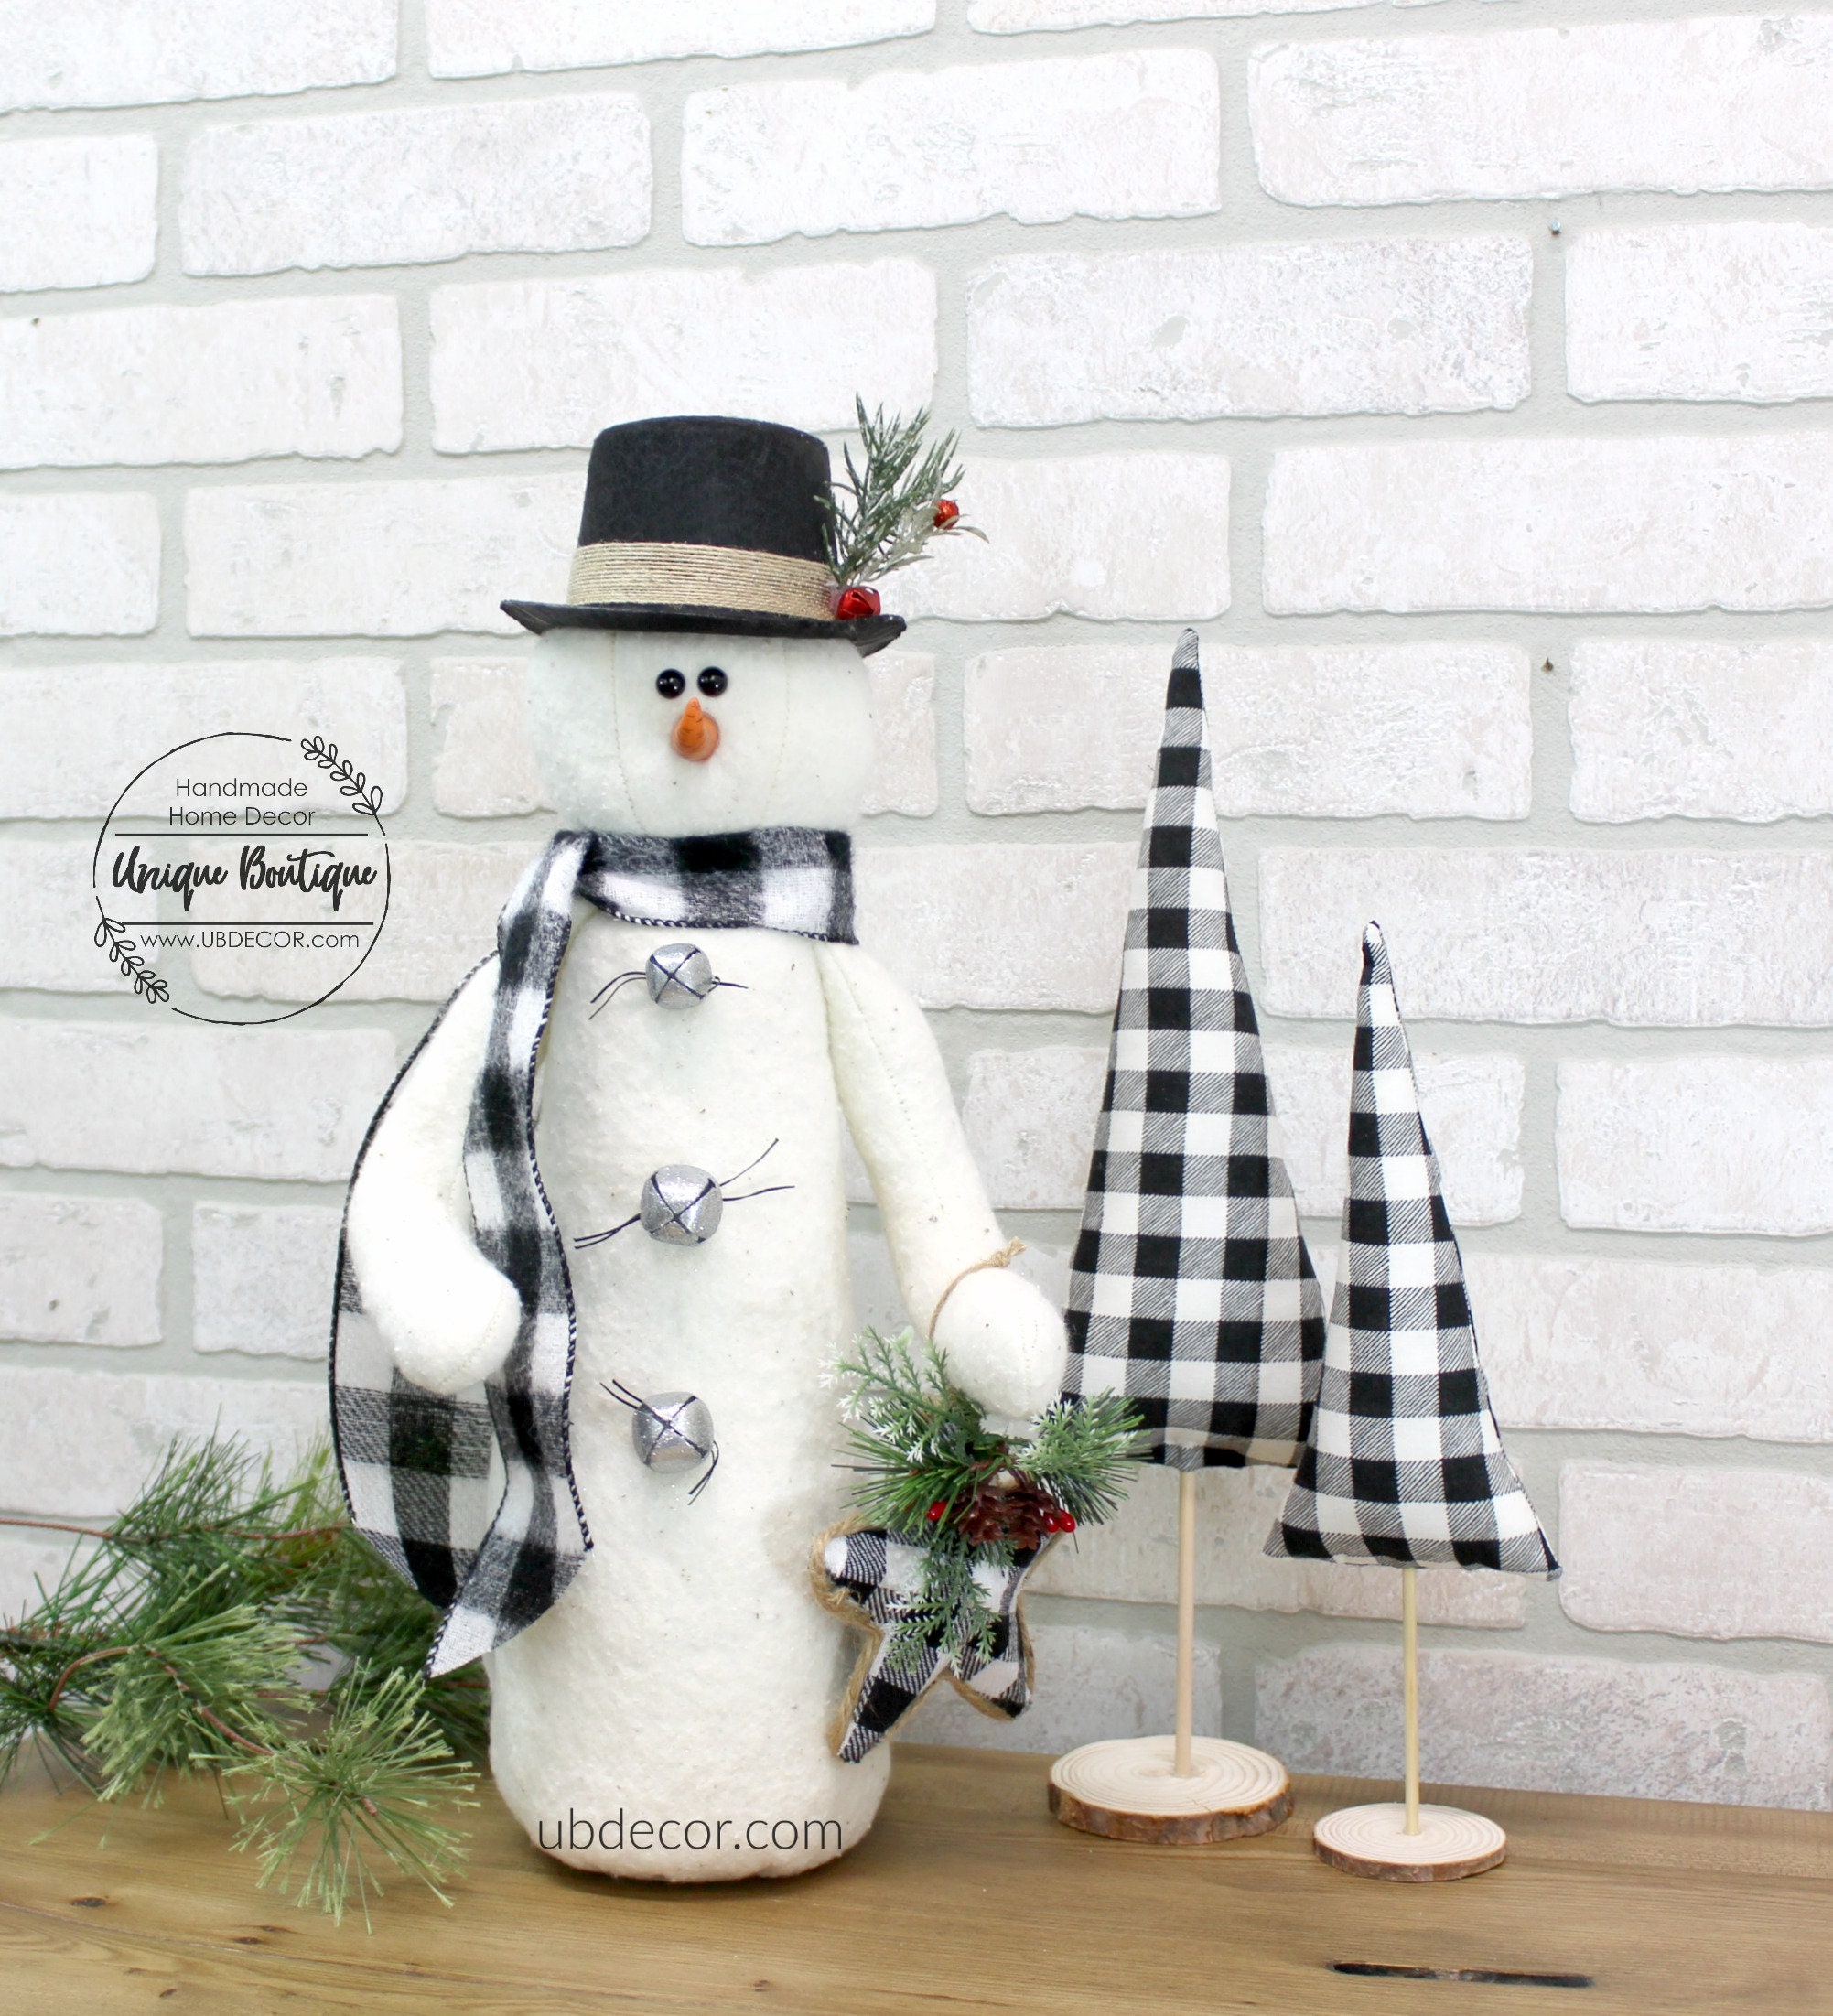 Country Love Crafts: Easy Fabric Painting Idea - Christmas/Xmas  Snowman/Snowmen Stocking Sock Boot